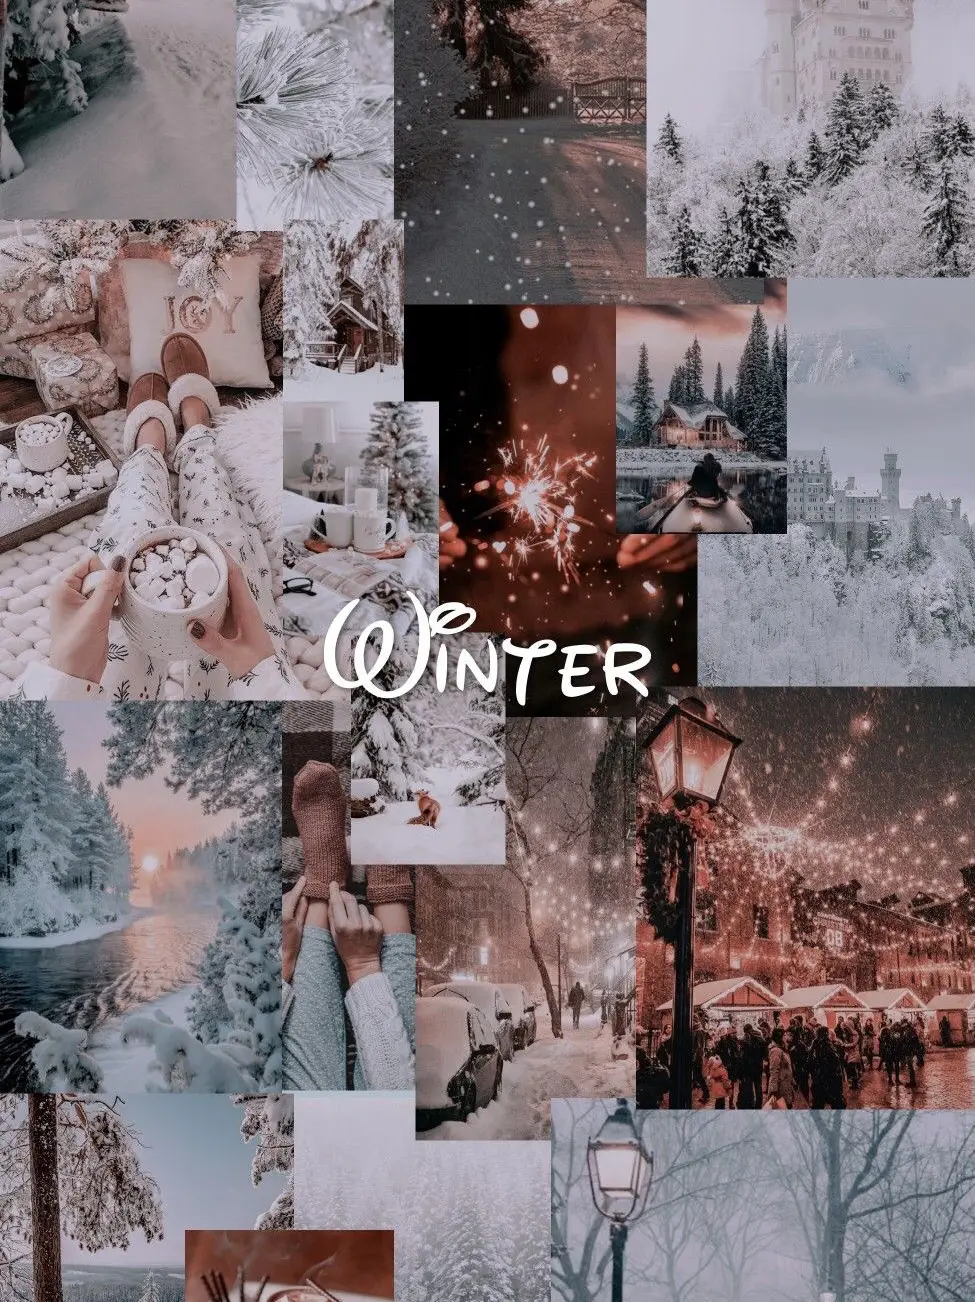 Winter iPhone Wallpapers - 28 Cute Winter iPhone Backgrounds  Disney  wallpaper, Iphone wallpaper winter, Wallpaper iphone disney